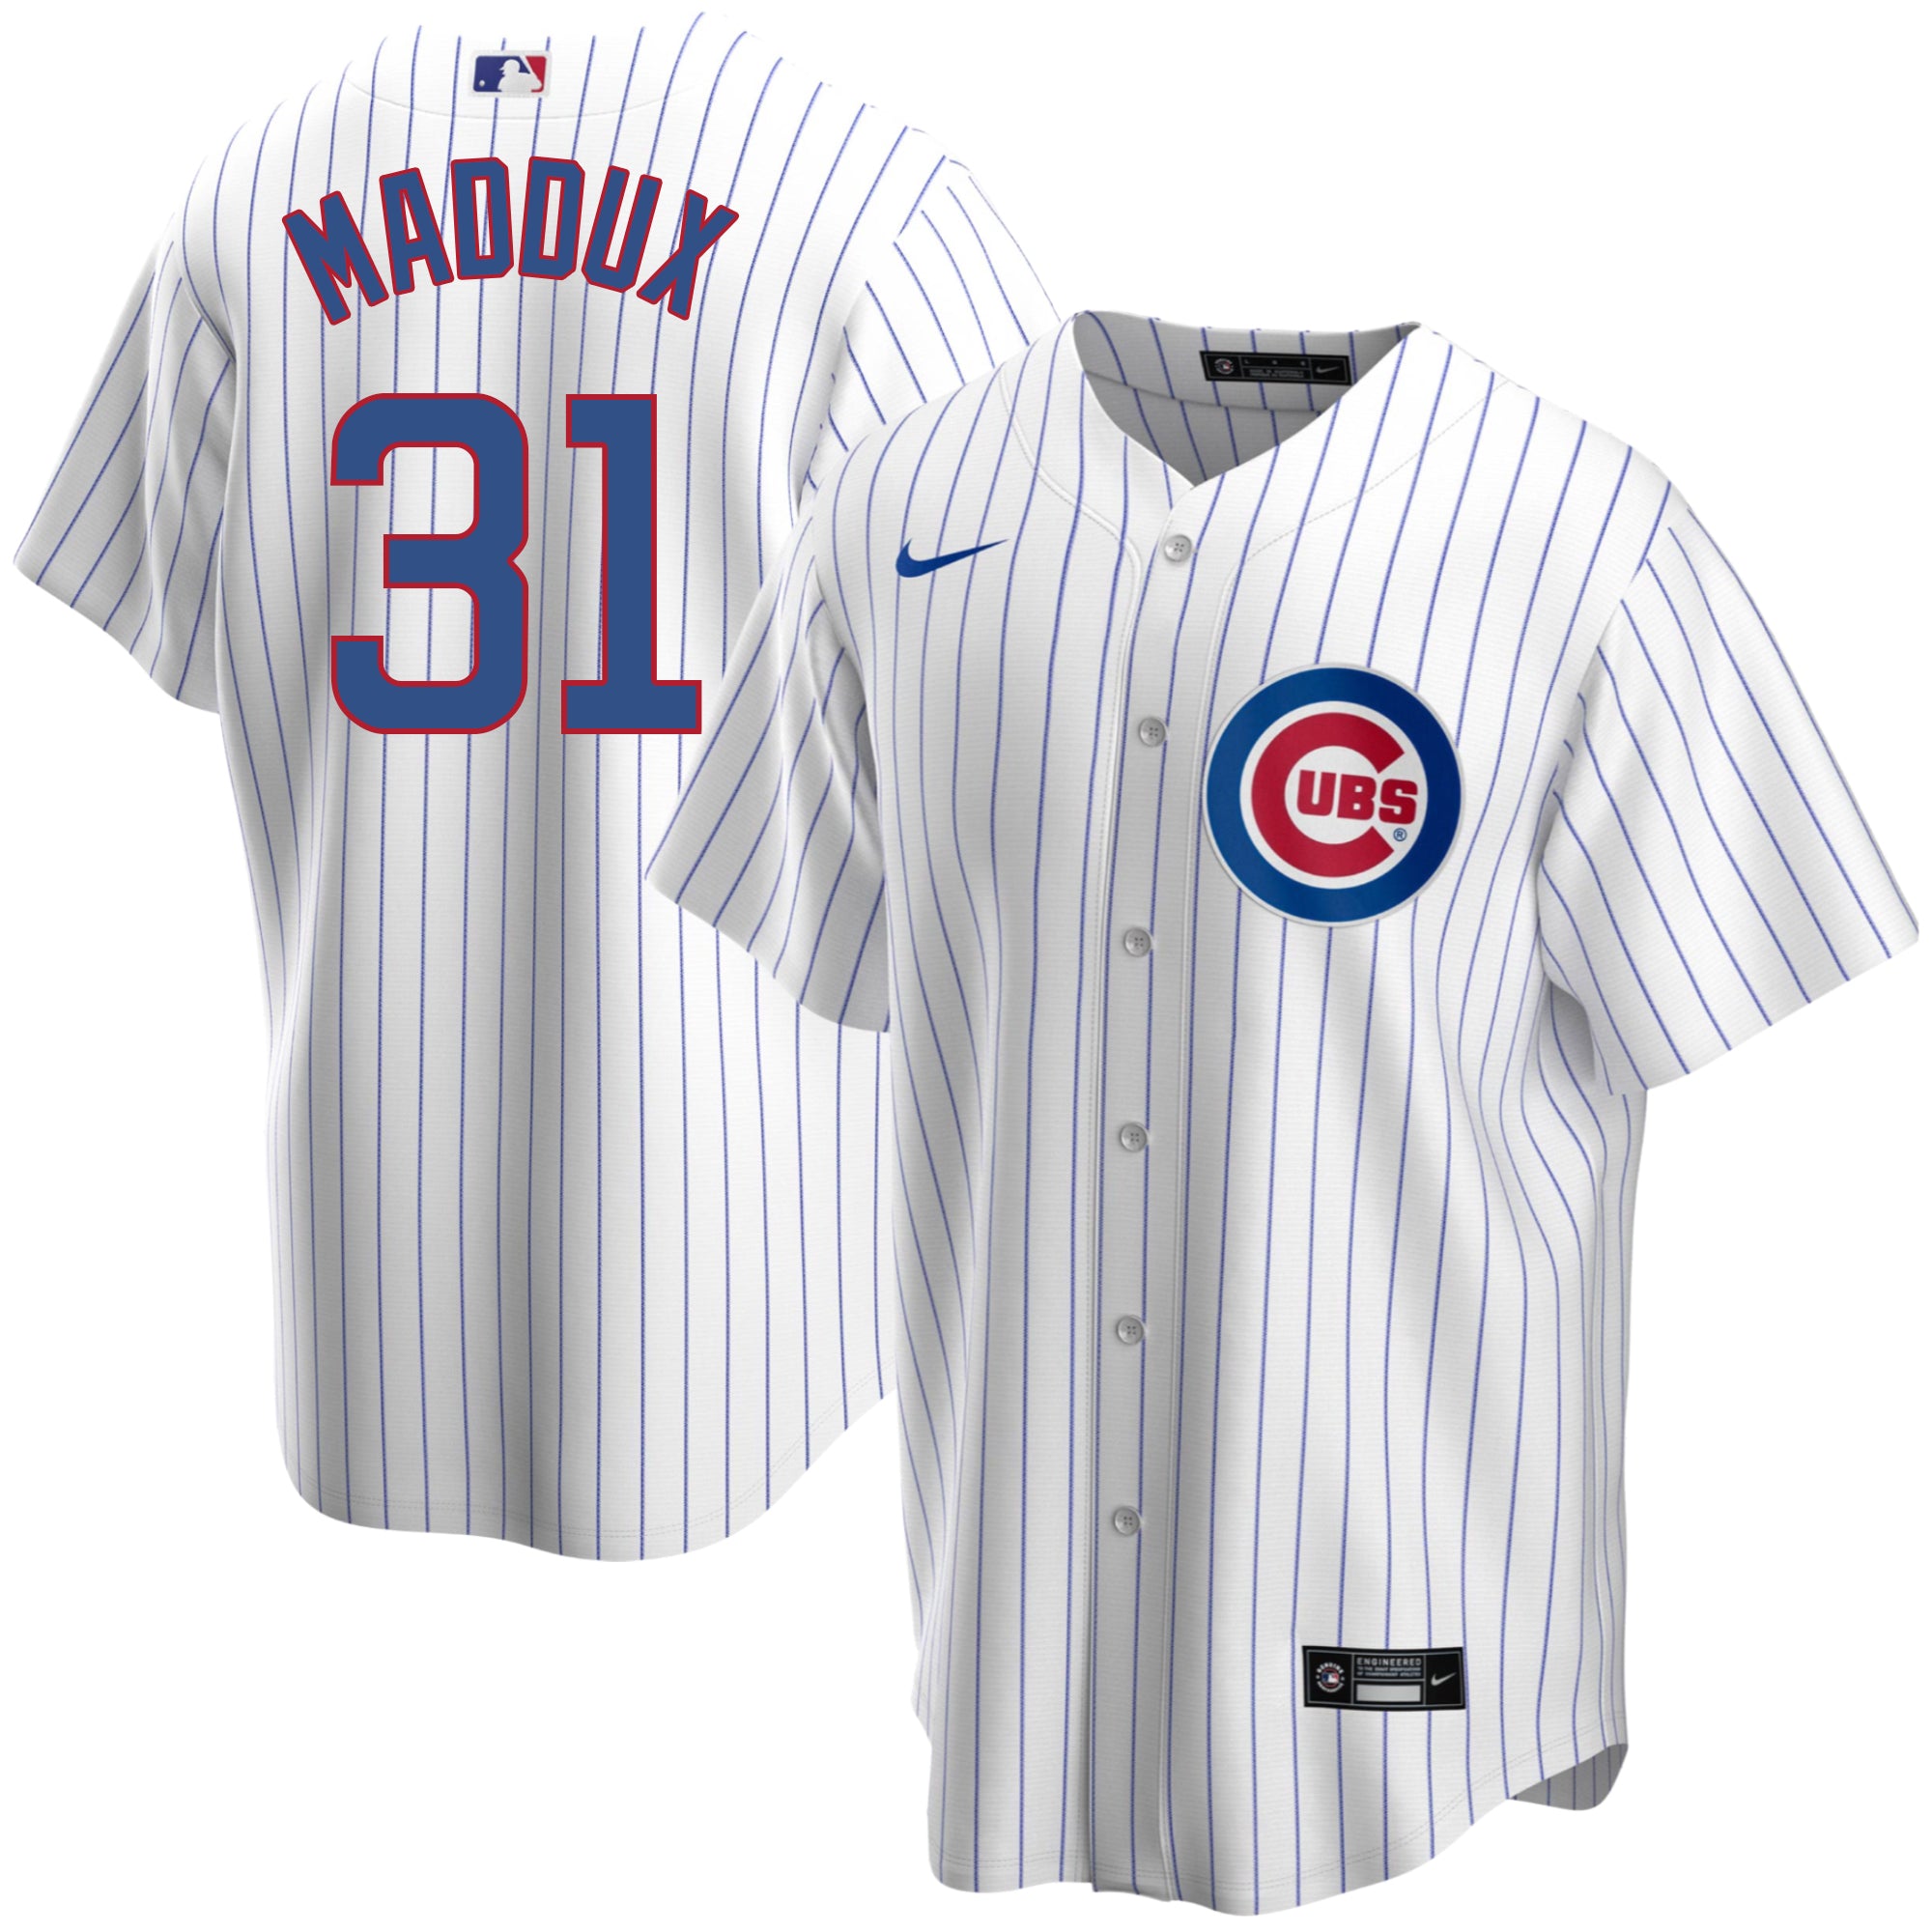 At Auction: MLB Chicago Cubs Majestic #31 Maddux Jersey - Mens Medium